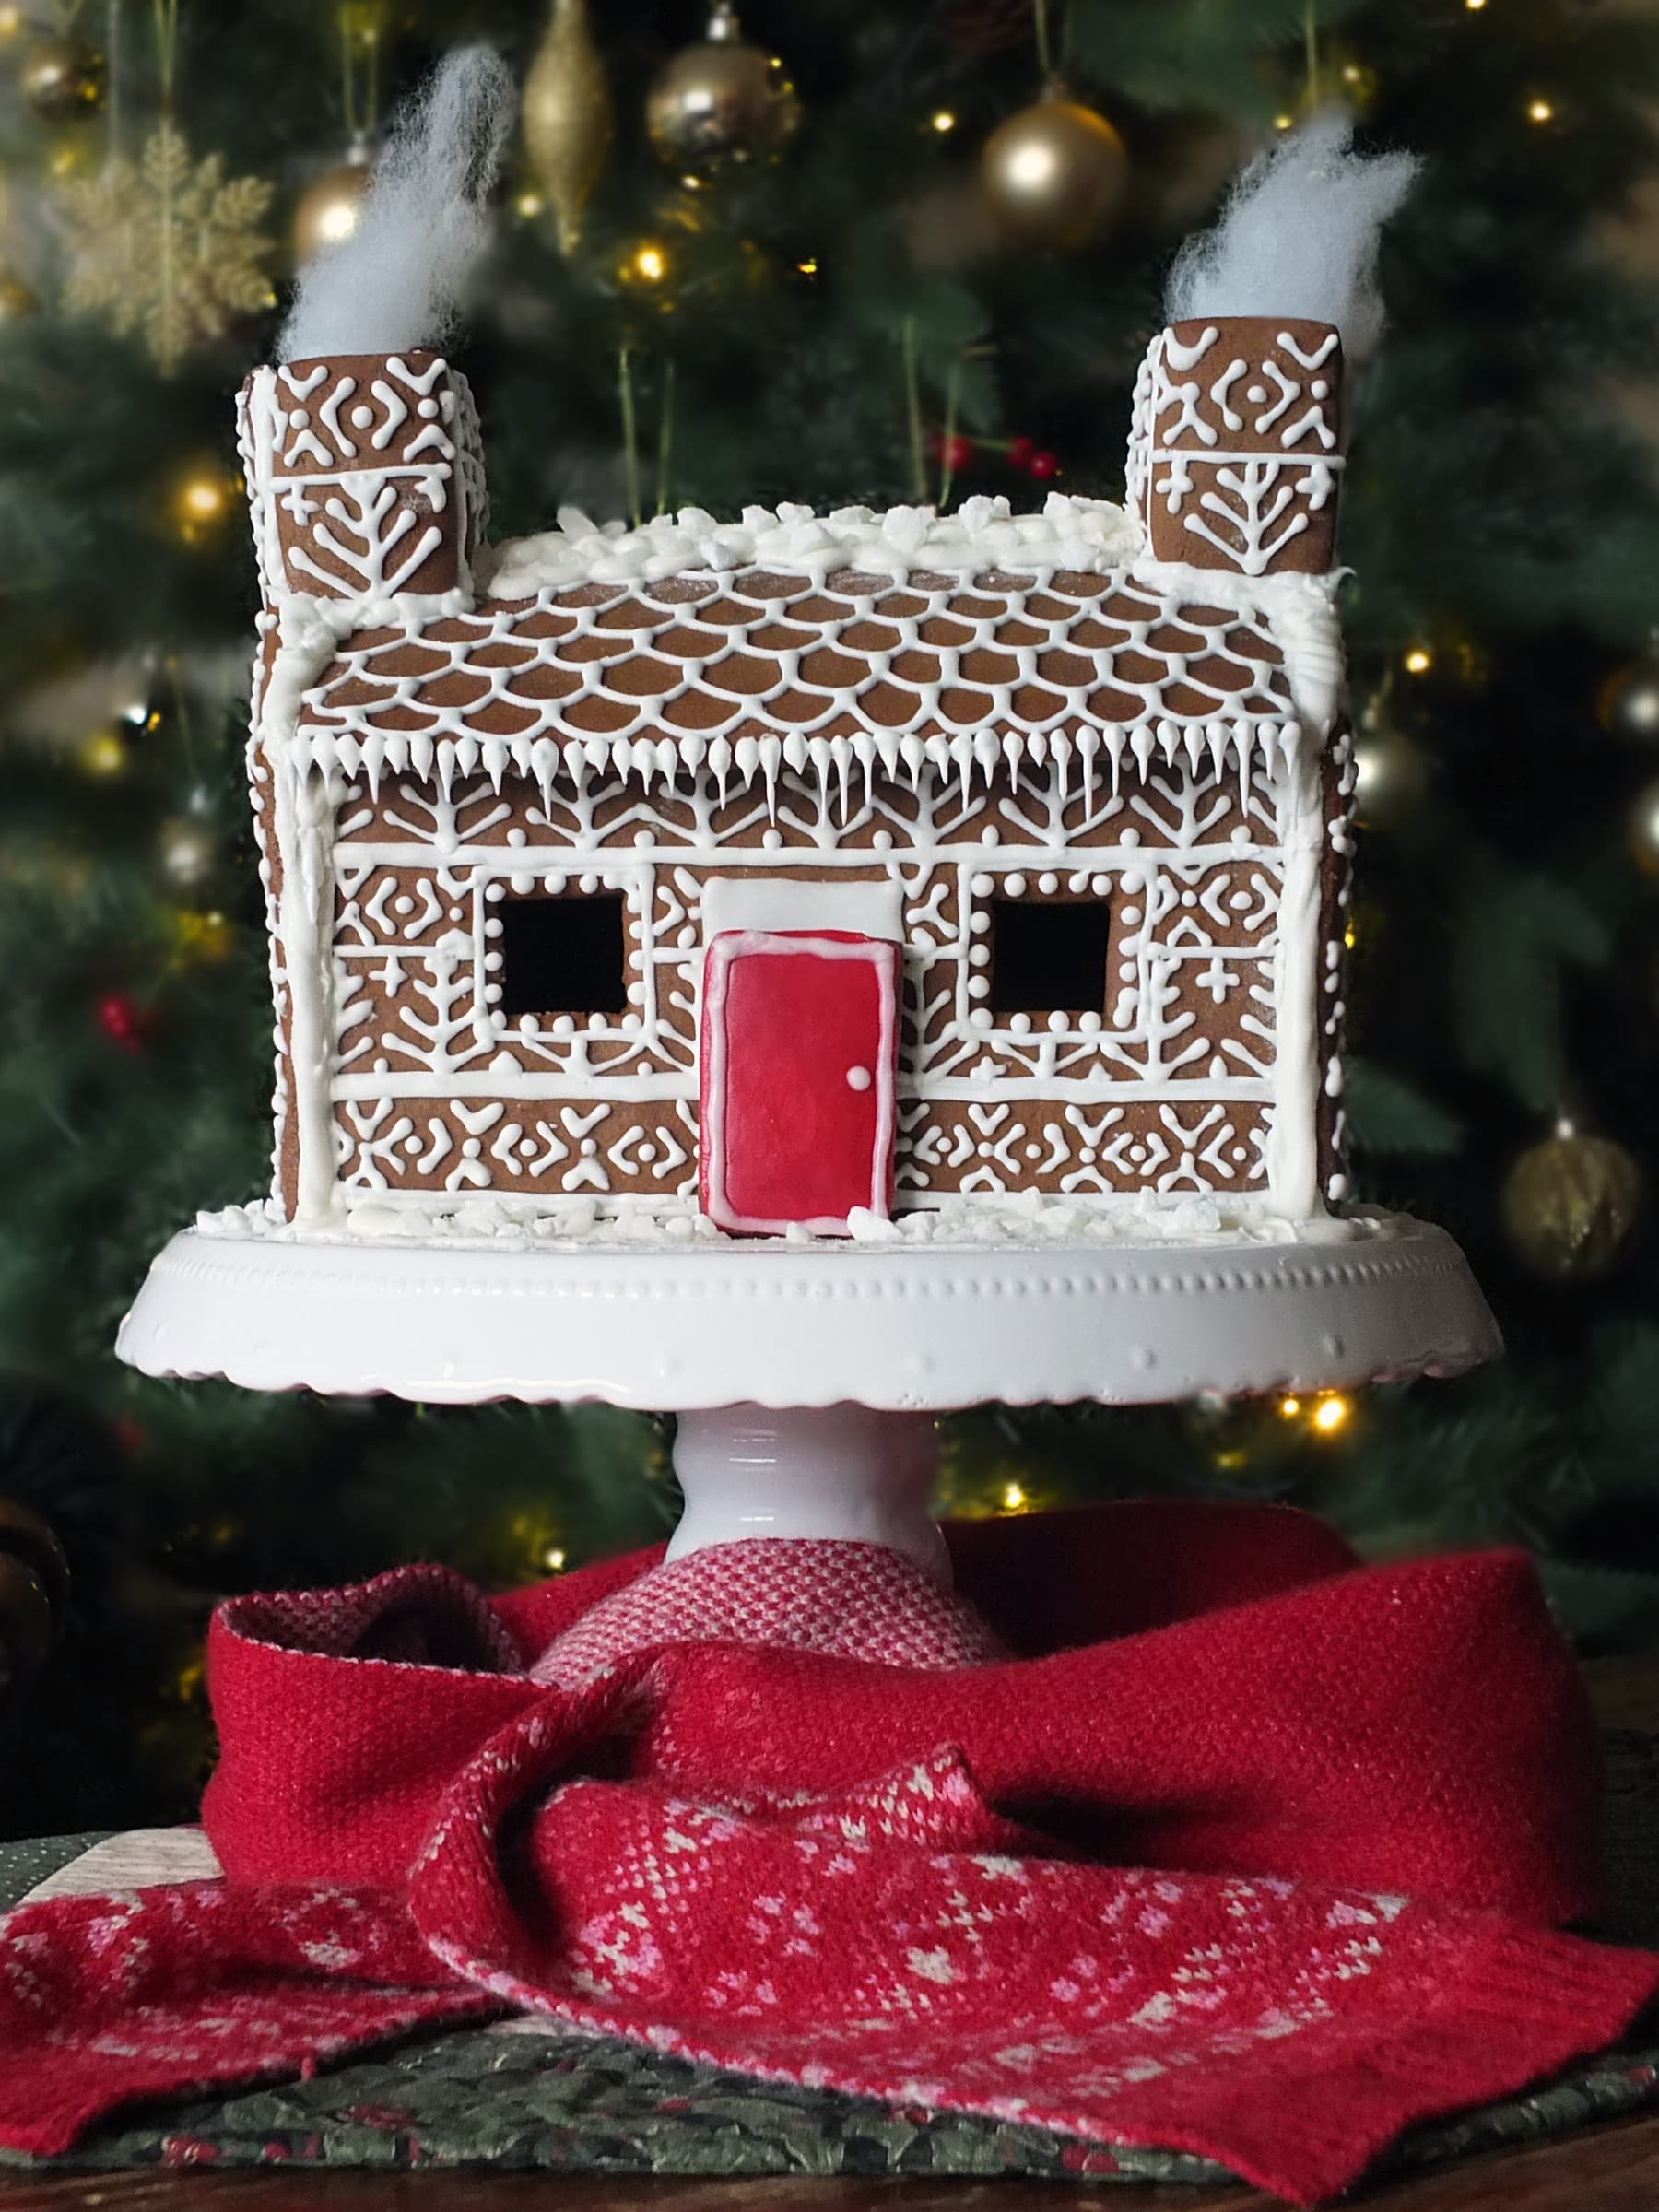 Image of a completed Shetland Croft Gingerbread house decorated with Fair Isle knitting designs and a bright red front door.